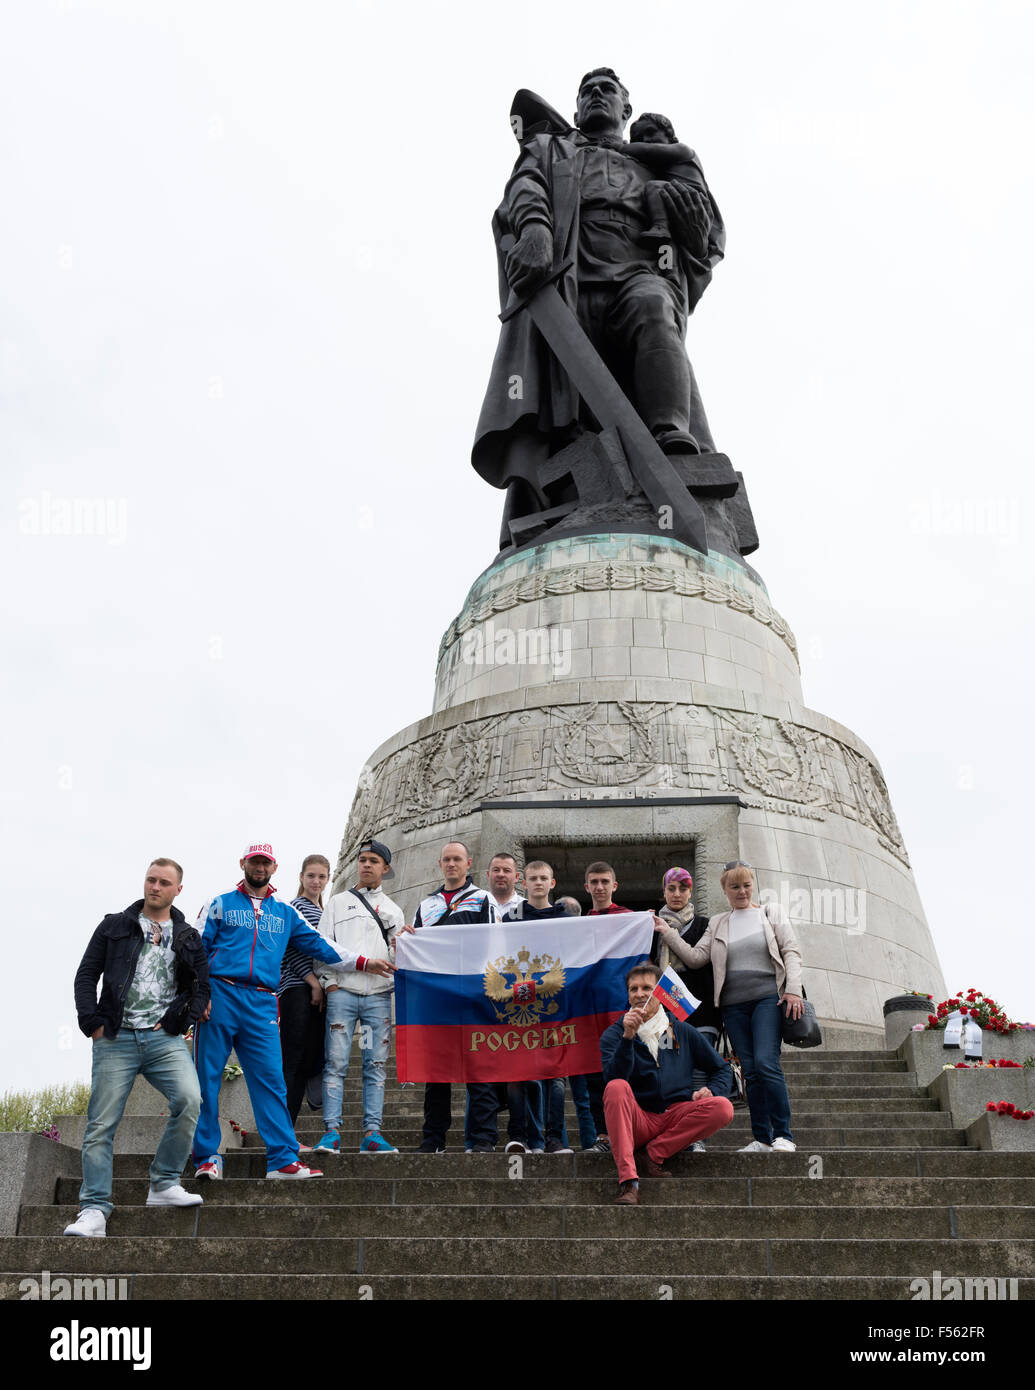 08.05.2015, Berlin, Berlin, Germany - Soviet War Memorial Treptow, 70th anniversary of the end of World War II that 9 May is considered in Russia as Victory Day over Nazi Germany, the sculpture ‰ Û ÏThe Befreier‰ Û Ï by Yevgeny Vuchetich is 12 meters high and 70 tons in weight, a group of Russian activists blocked access to the top during the bottom taking place wreath-laying ceremony by the Ambassador of Ukraine for a few minutes. EBS150508D520CAROEX.JPG - NOT for SALE in G E R M A N Y, A U S T R I A, S W I T Z E R L A N D [MODEL RELEASE: NO, PROPERTY RELEASE: NO (c) caro photo agency / Schul Stock Photo